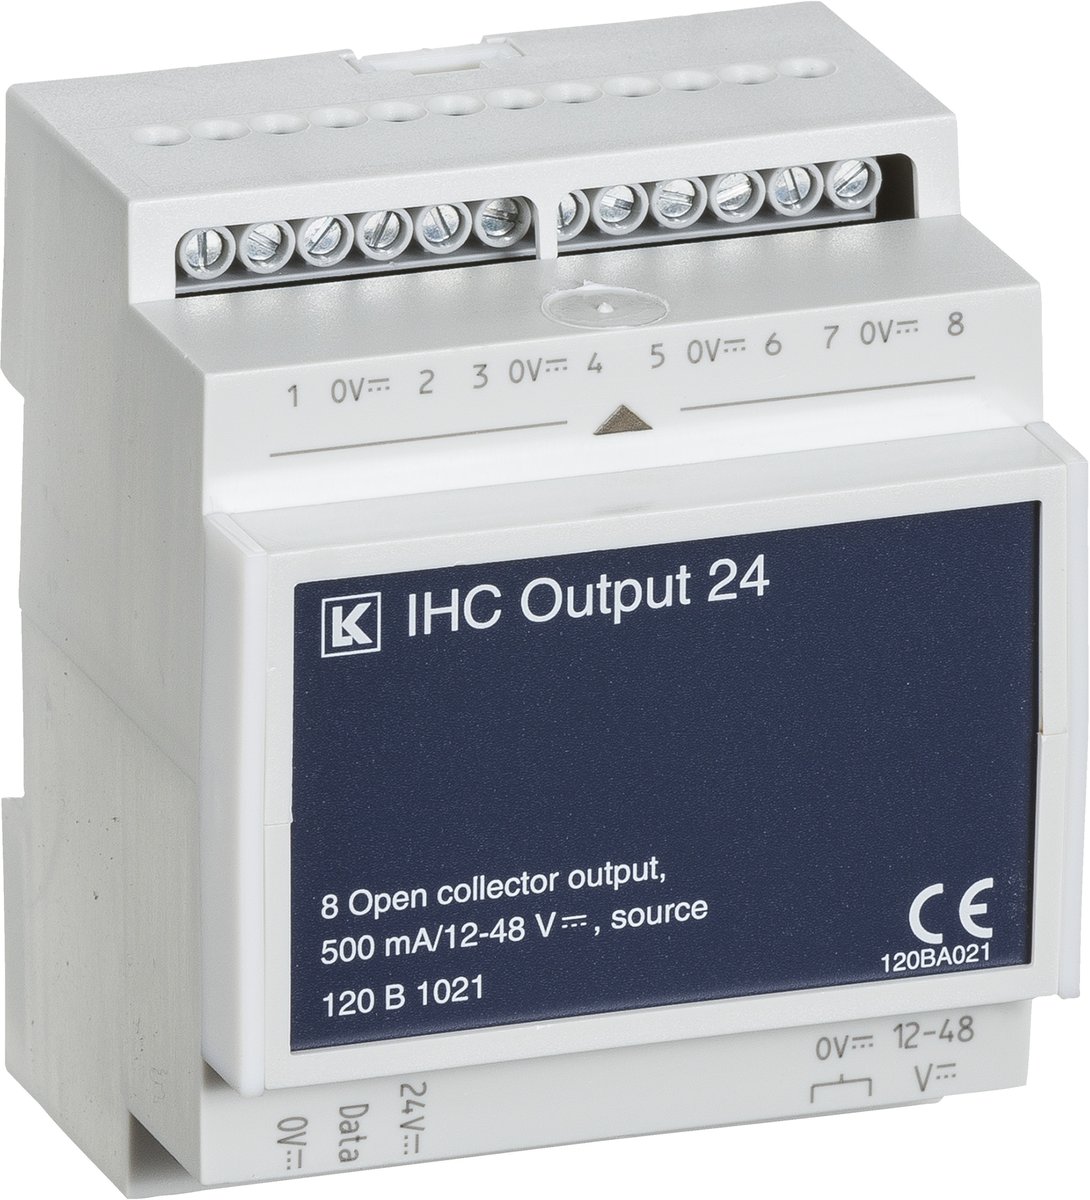 Square D IHC Output 24 8 Open Collector Output 